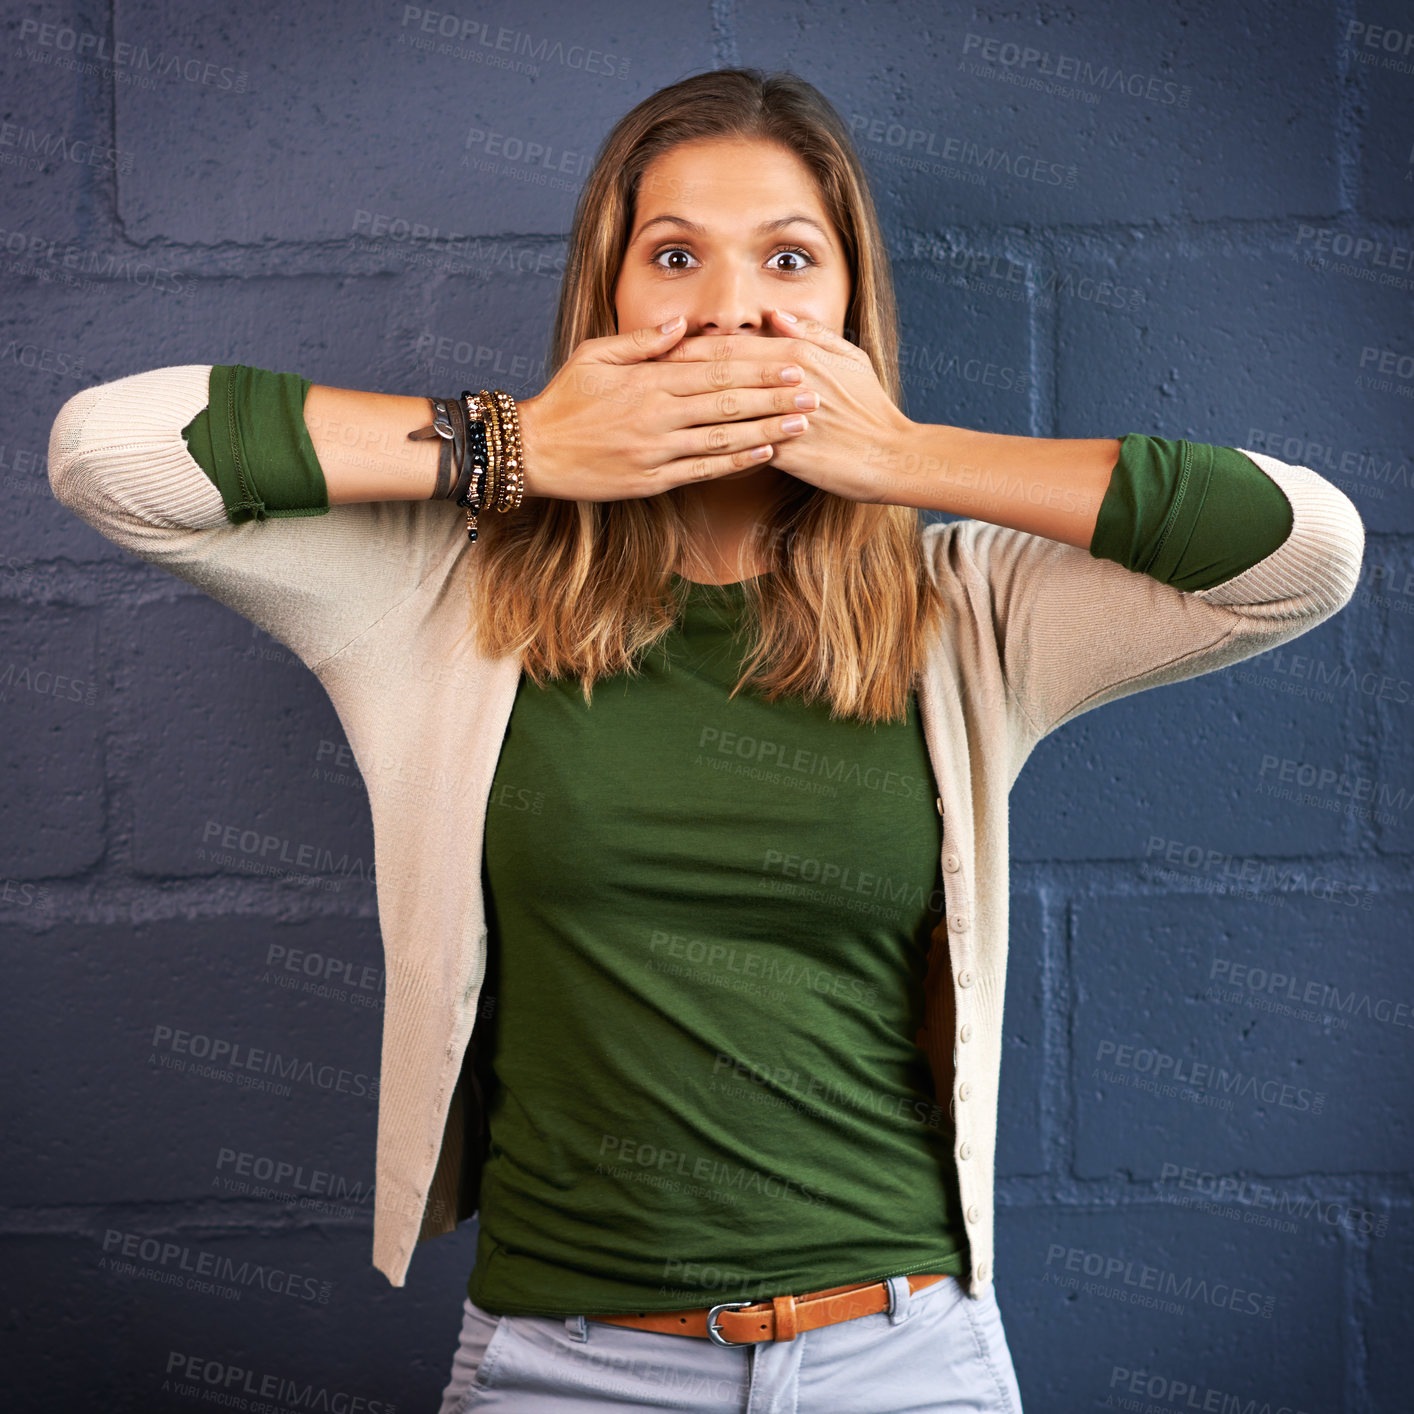 Buy stock photo Shot of a young woman covering her mouth against a brick wall background